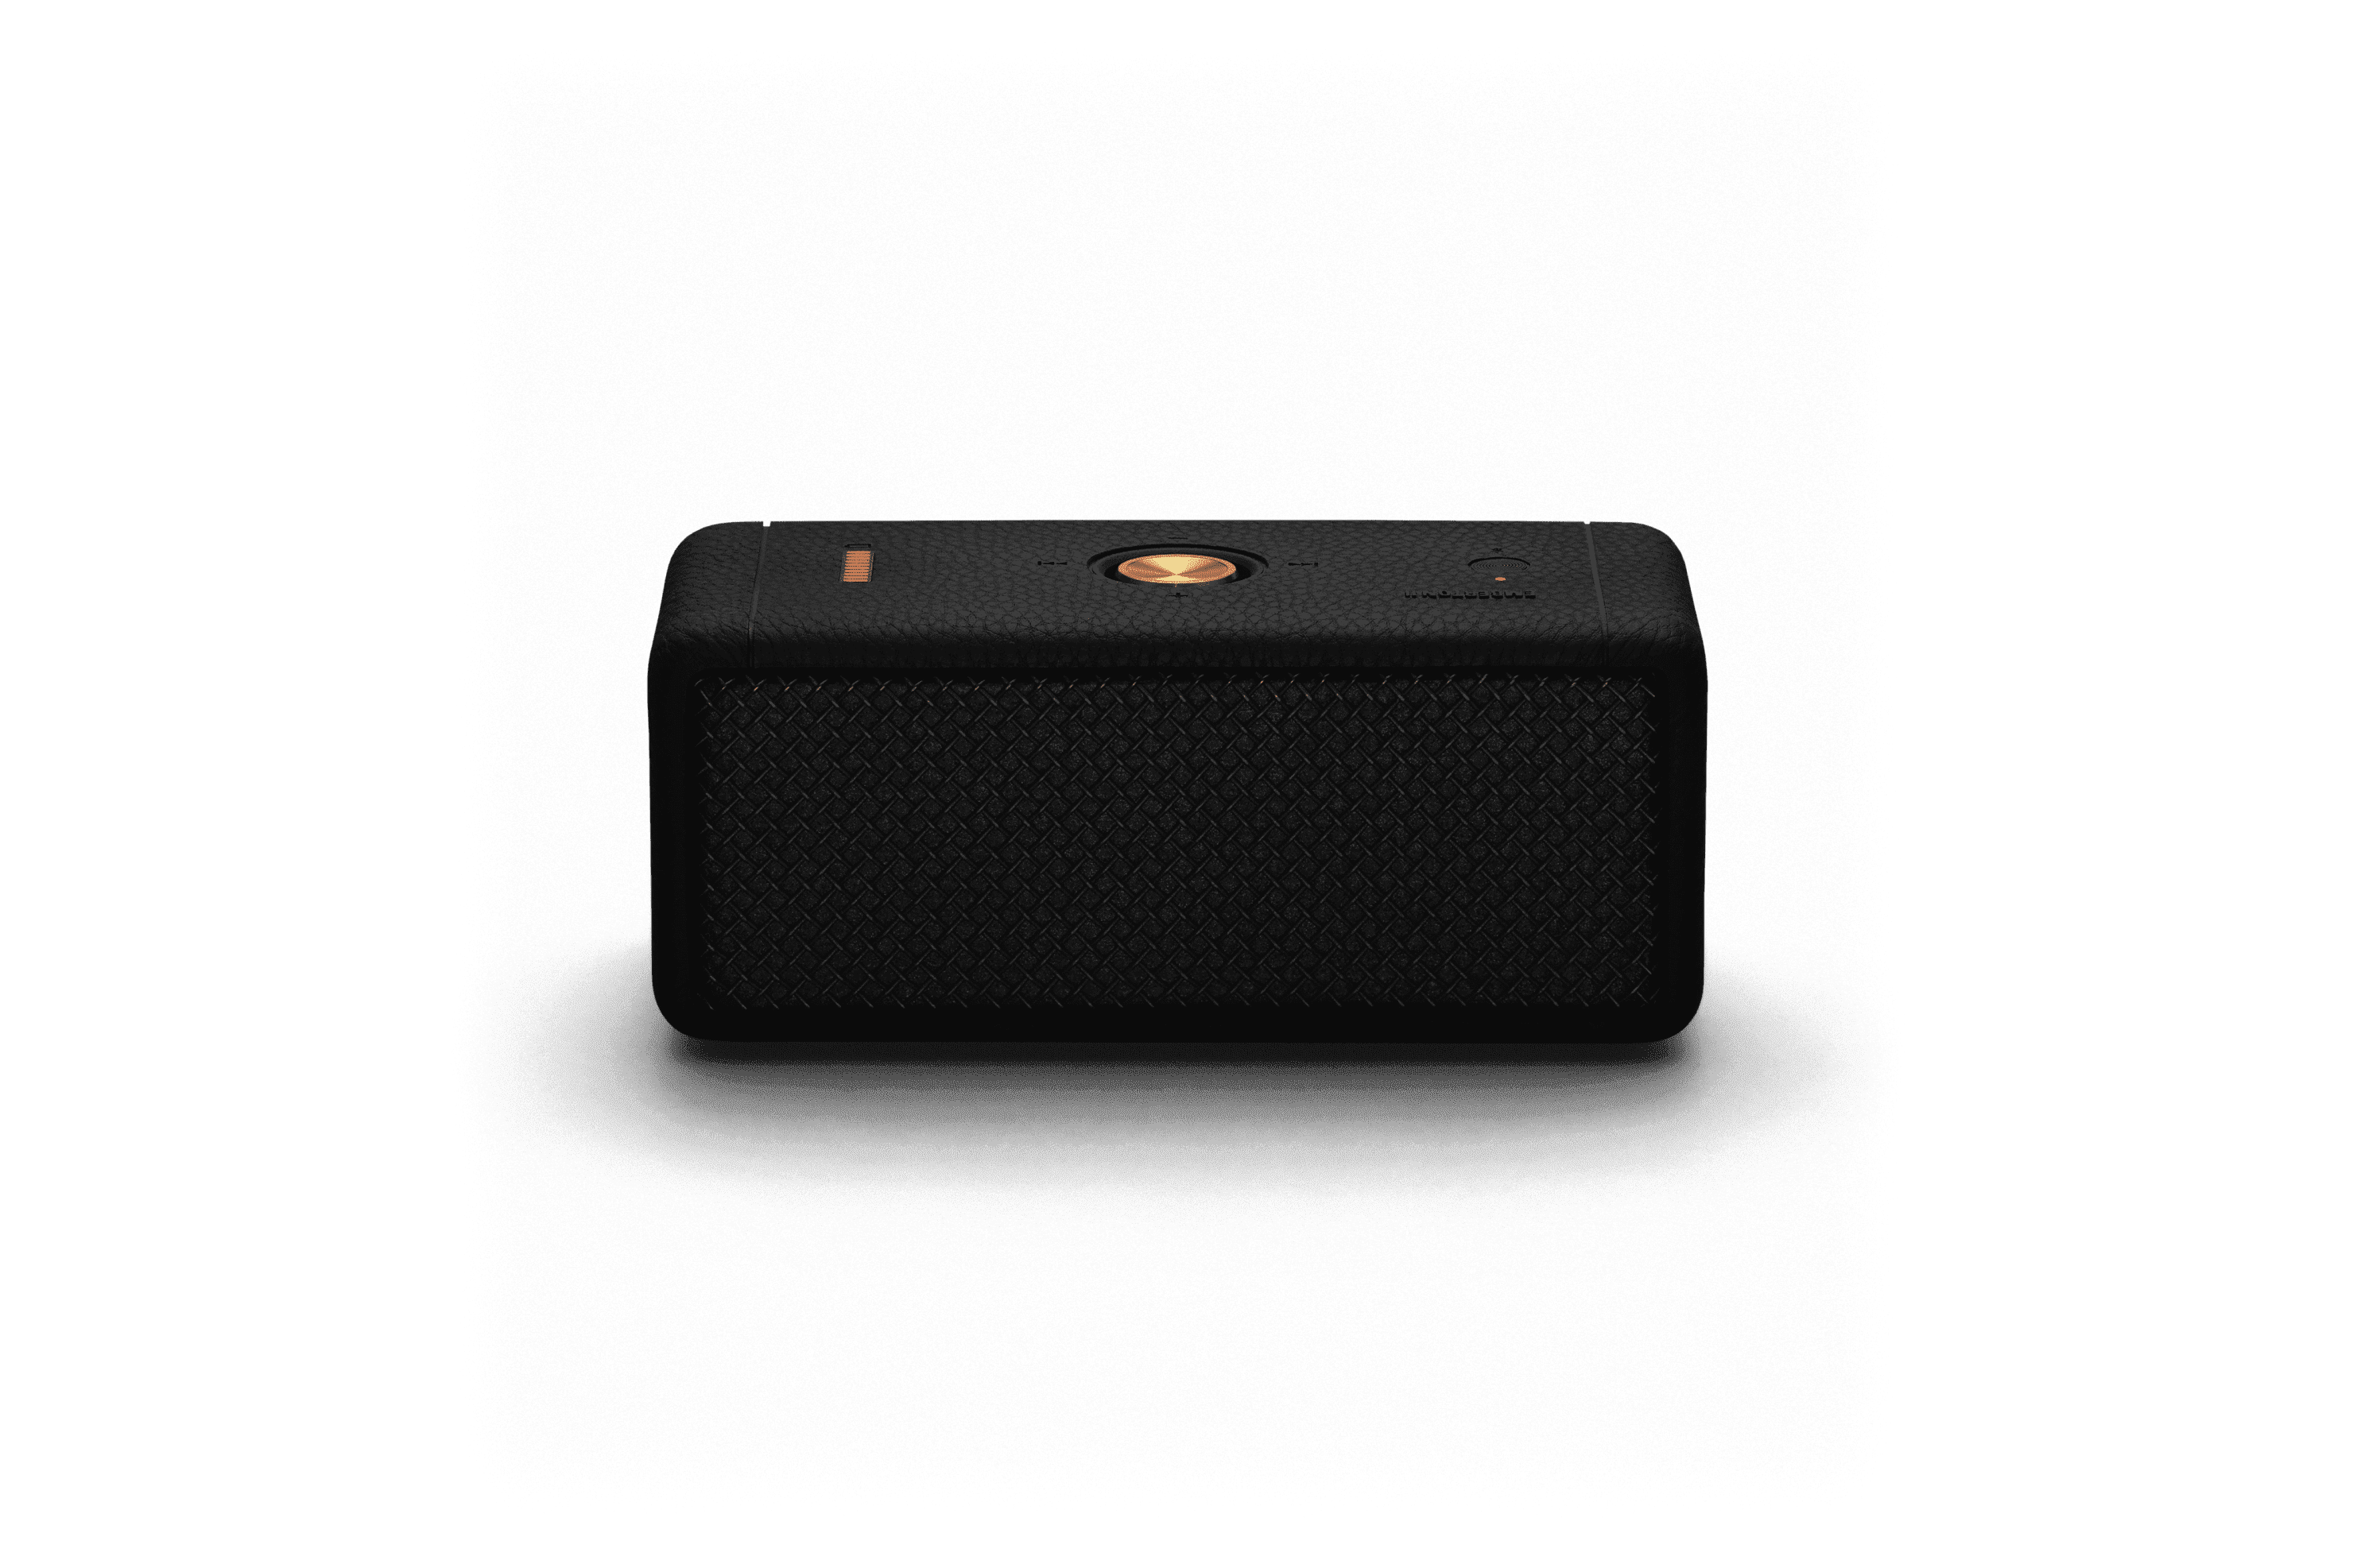 Take it to 11 with the Emberton II portable speaker from Marshall